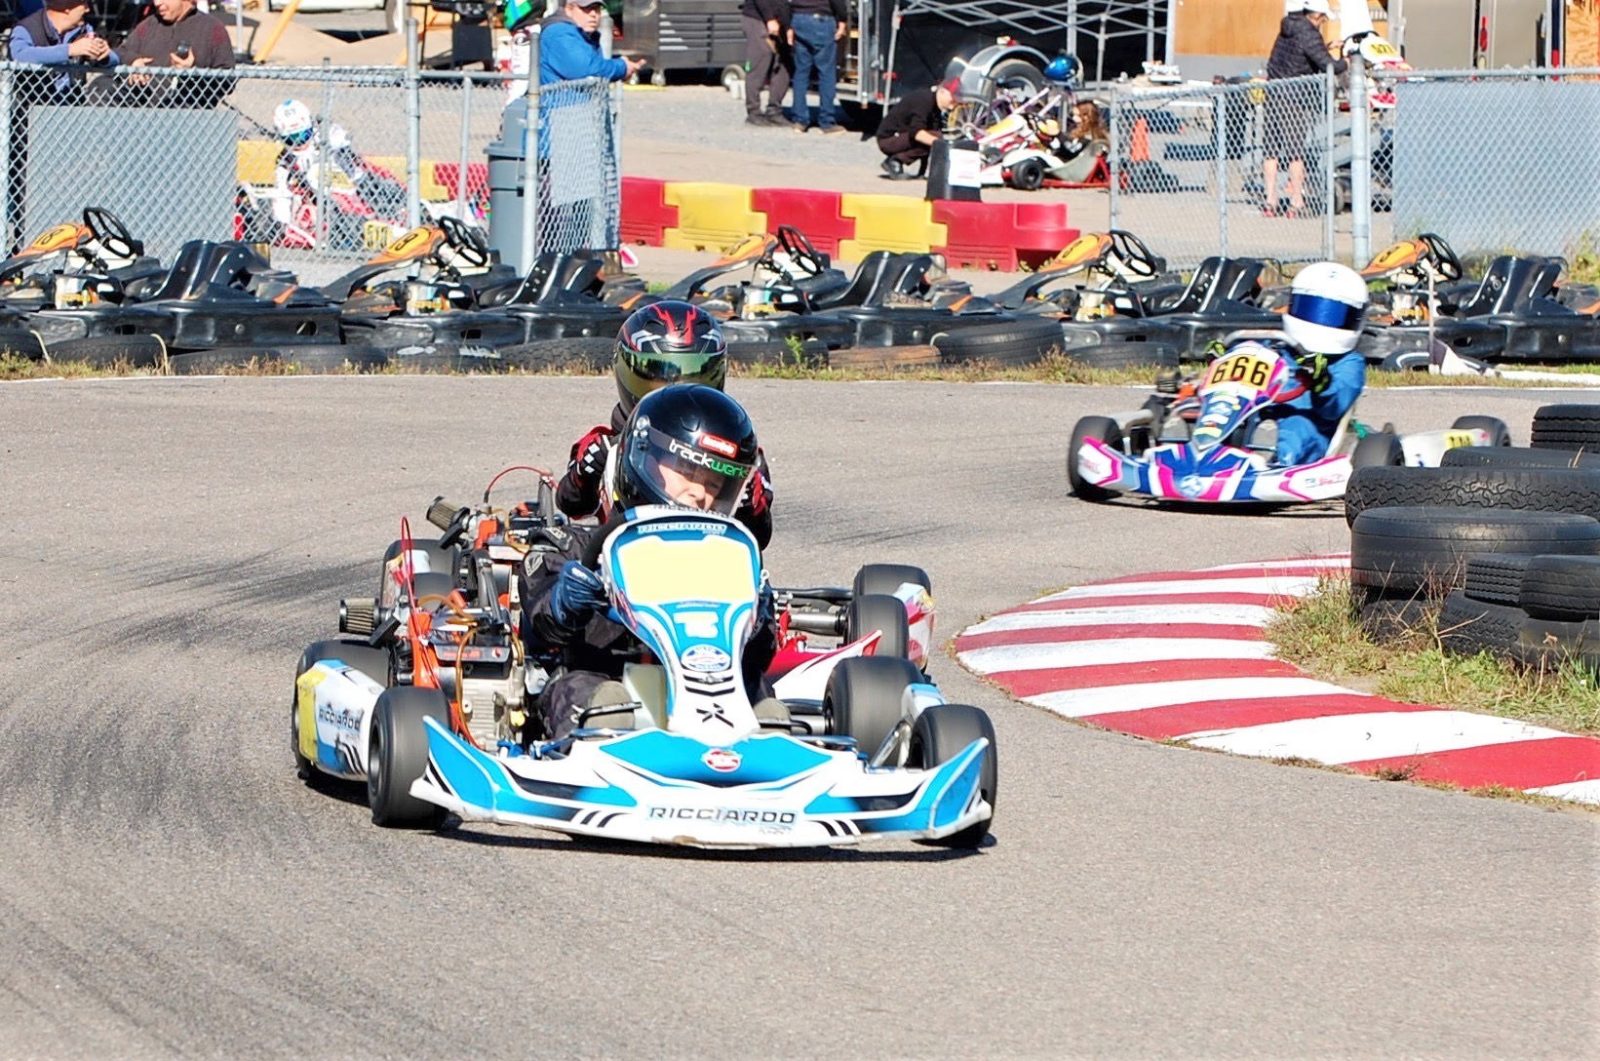 Championship kart racing means total control